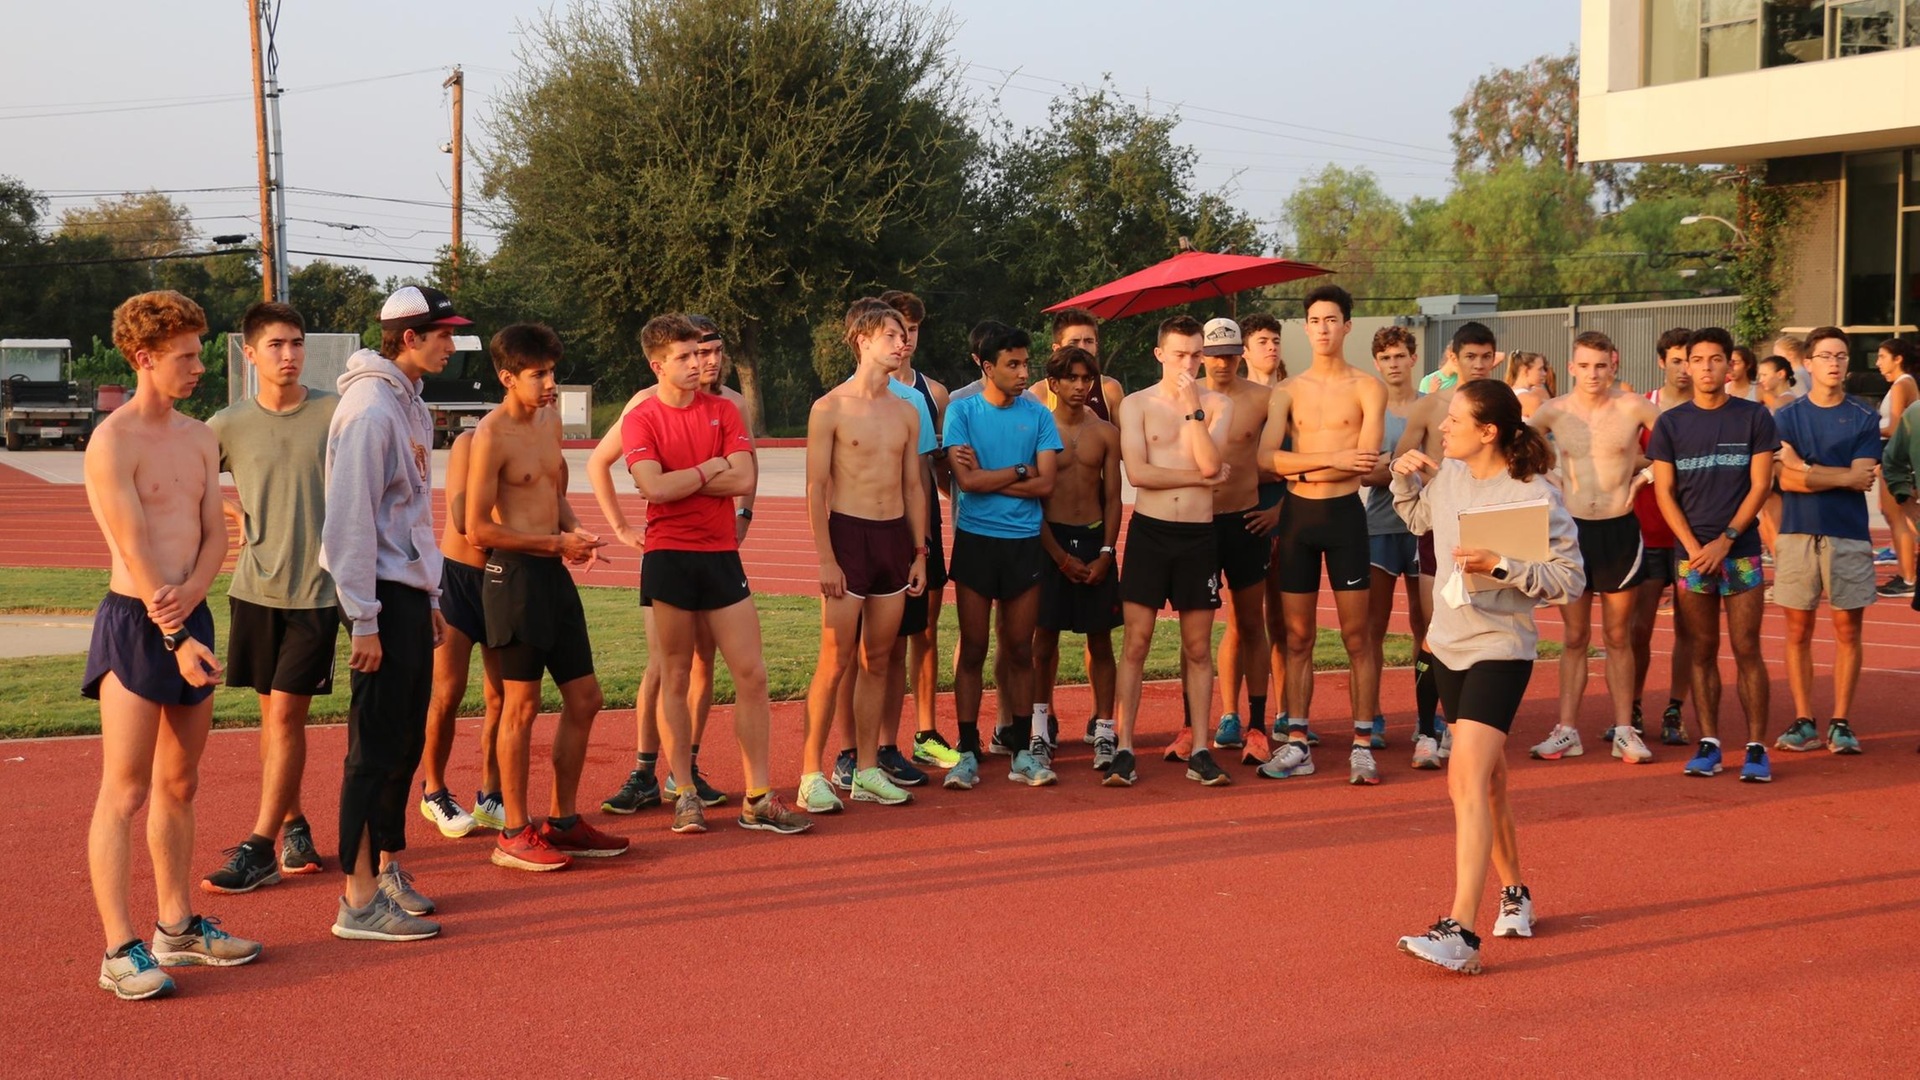 The men's cross country team meets before a recent practice.